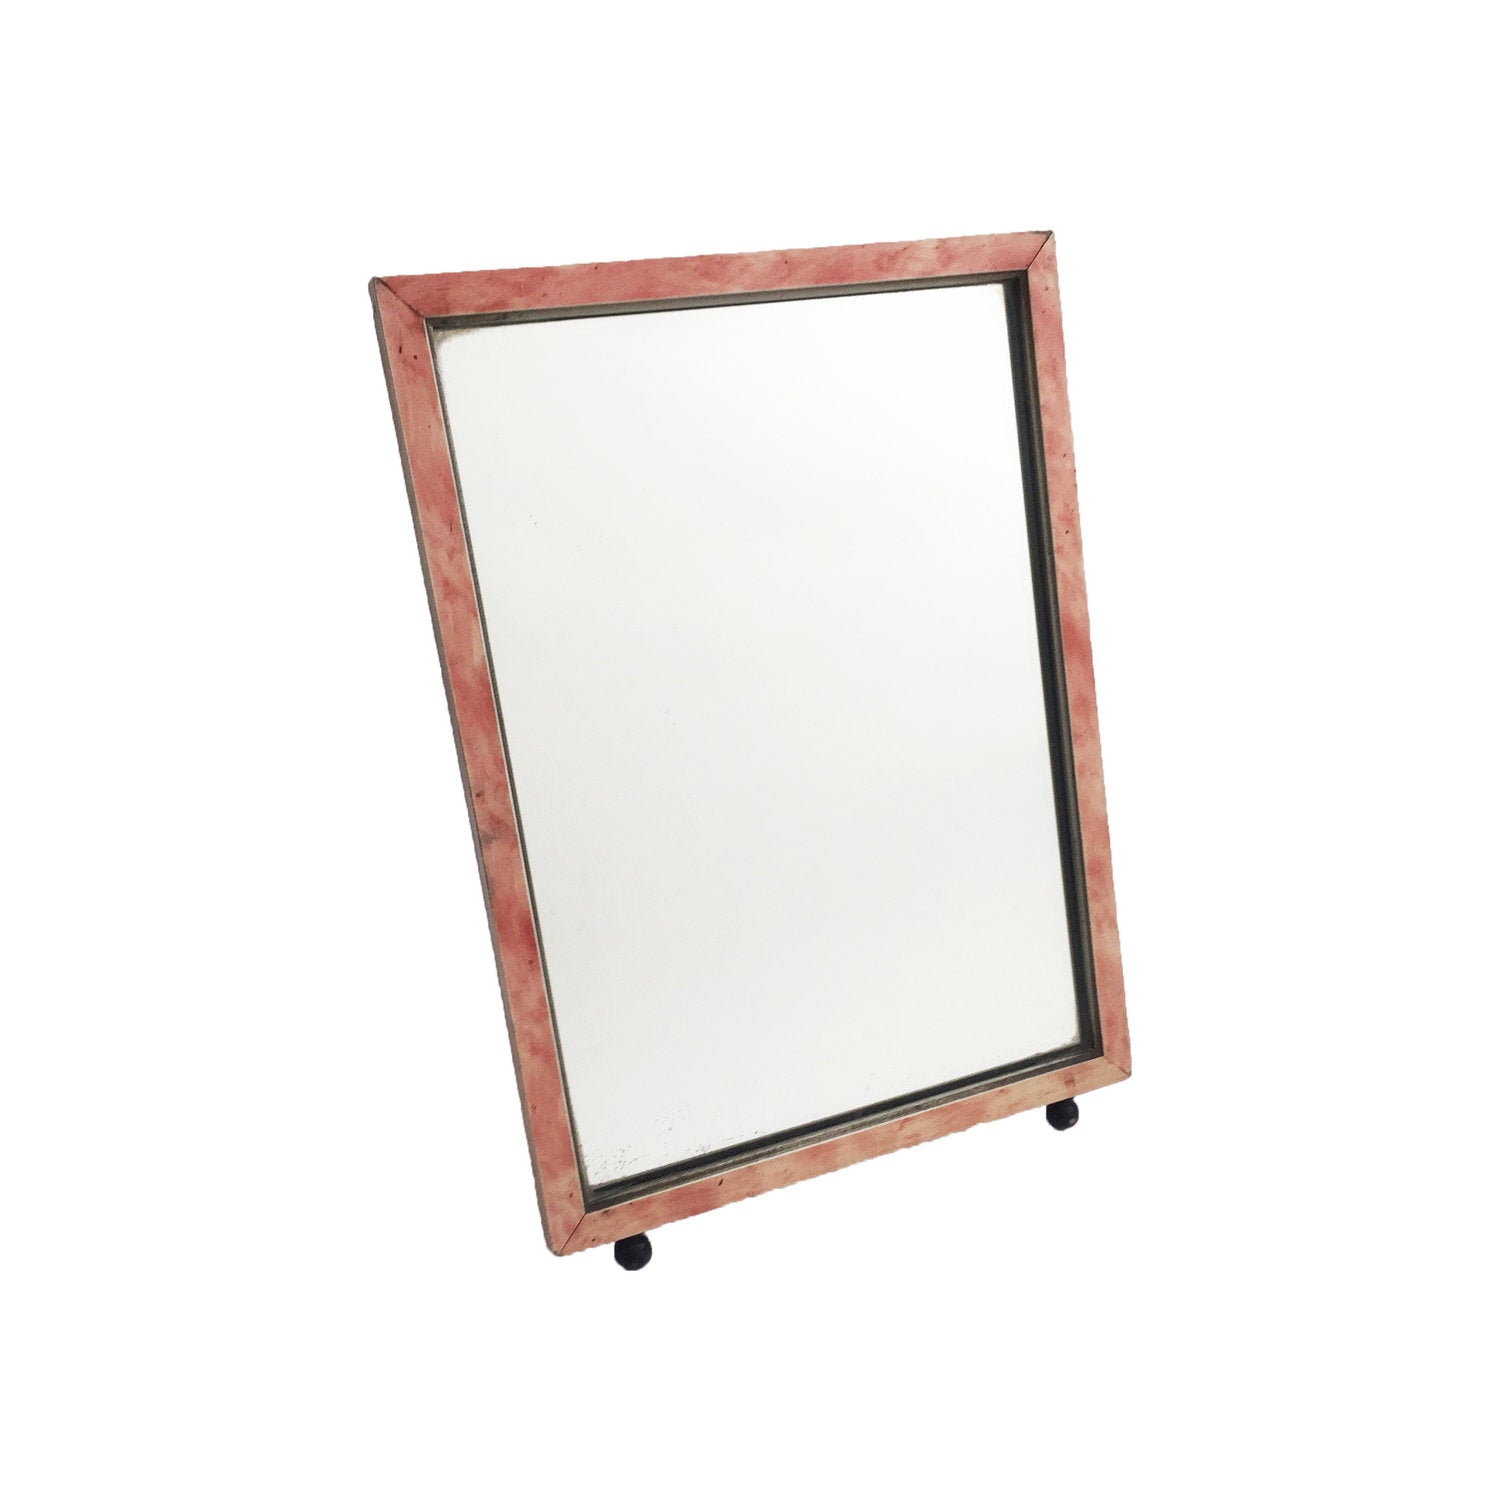 PICTURE FRAME MIRROR